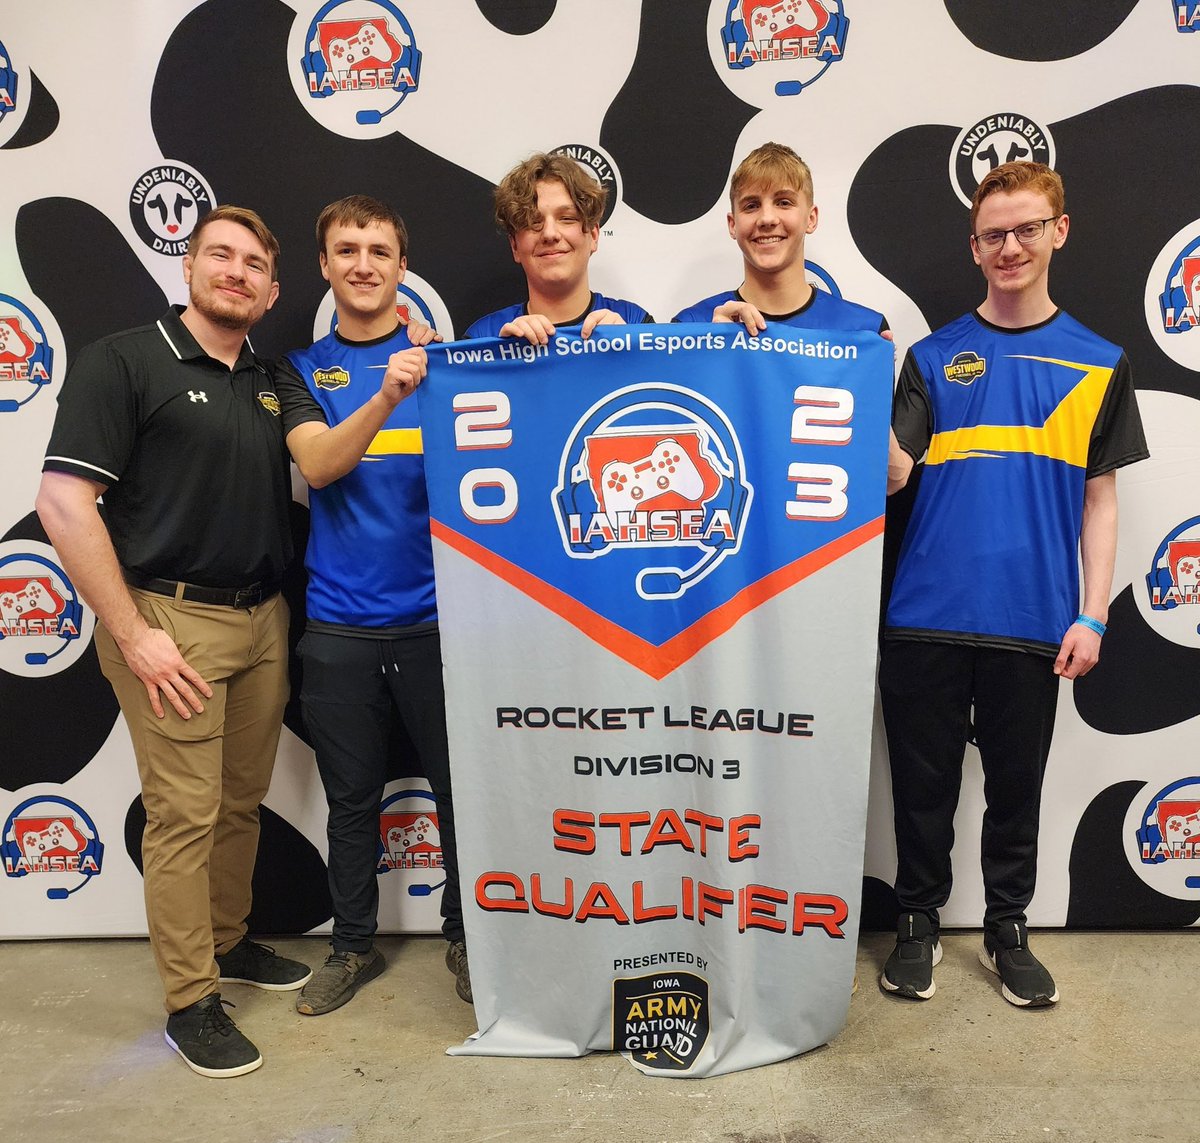 In our first esports appearance ever your Westwood Rebels have taken 4th place in the Rocket League state championship!!!

#RocketLeague #IAHSEA #esports #RebelStrong